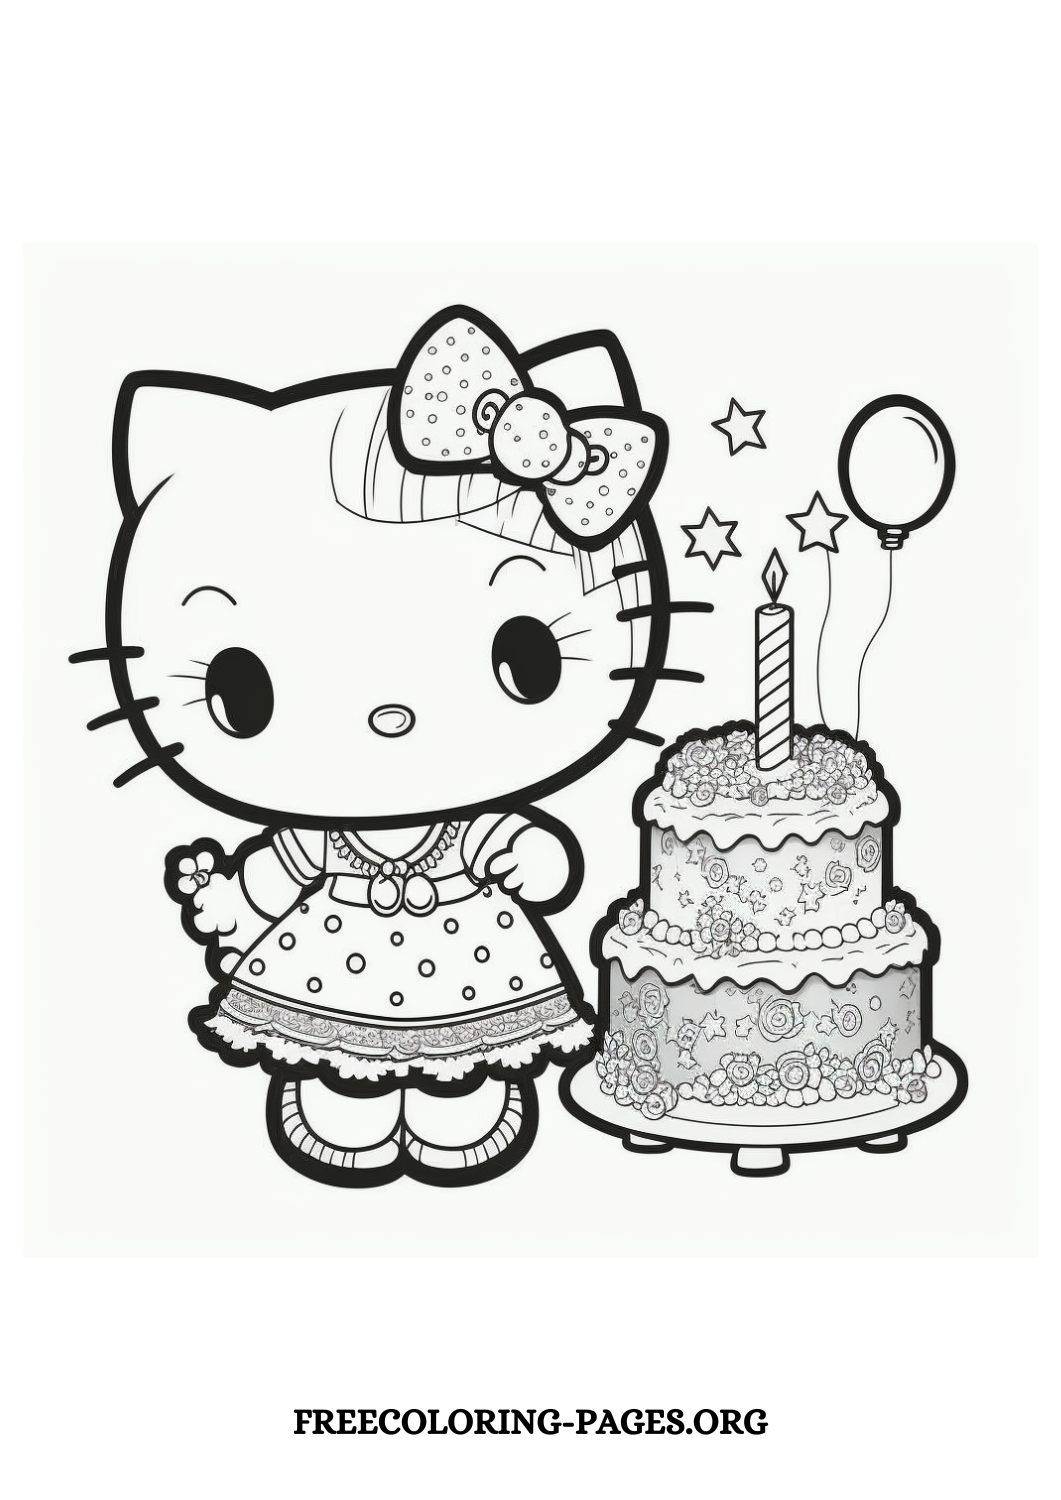 hello kitty birthday coloring pages , hello kitty coloring printable pages, hello kitty and friends coloring pages , free printable hello kitty coloring pages